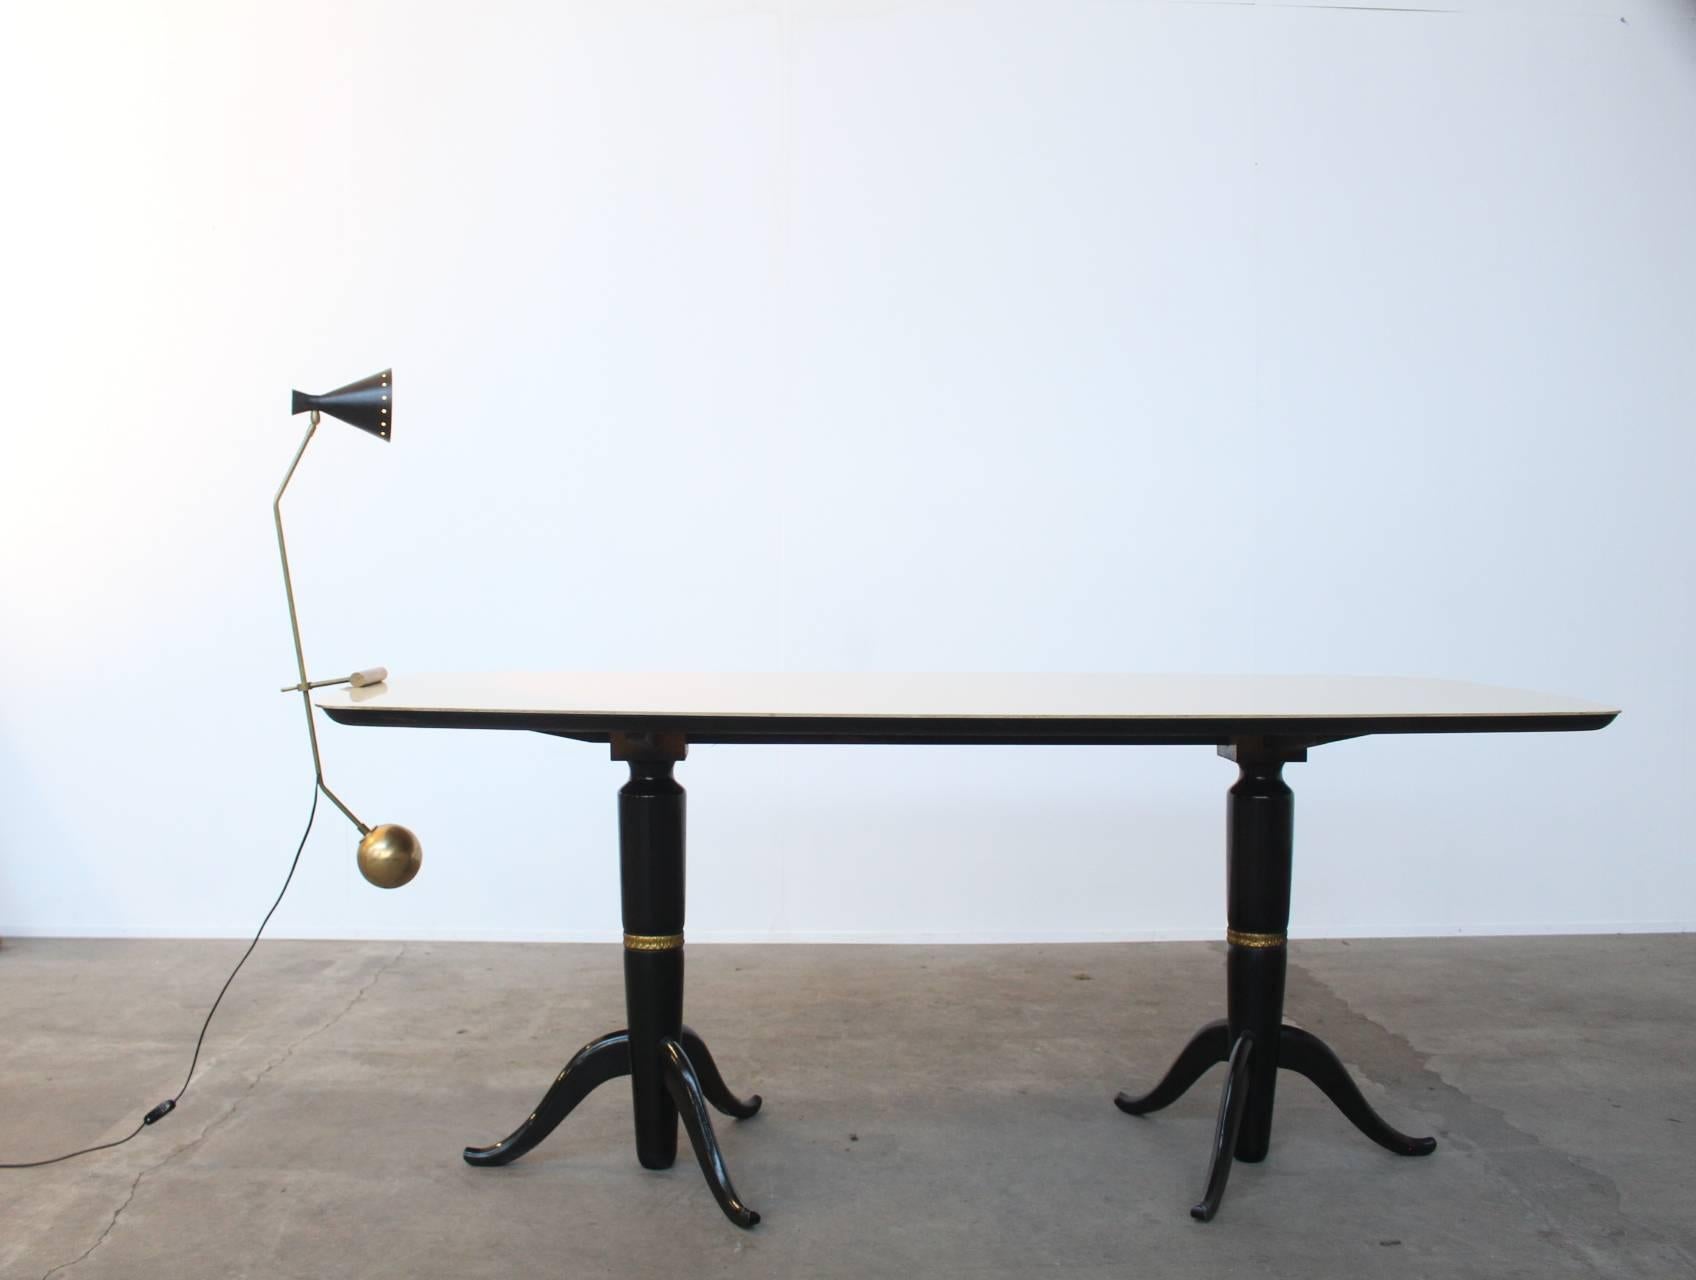 Large Italian Stilnovo Counter Weight Desk Lamp In Excellent Condition For Sale In Amsterdam, NL